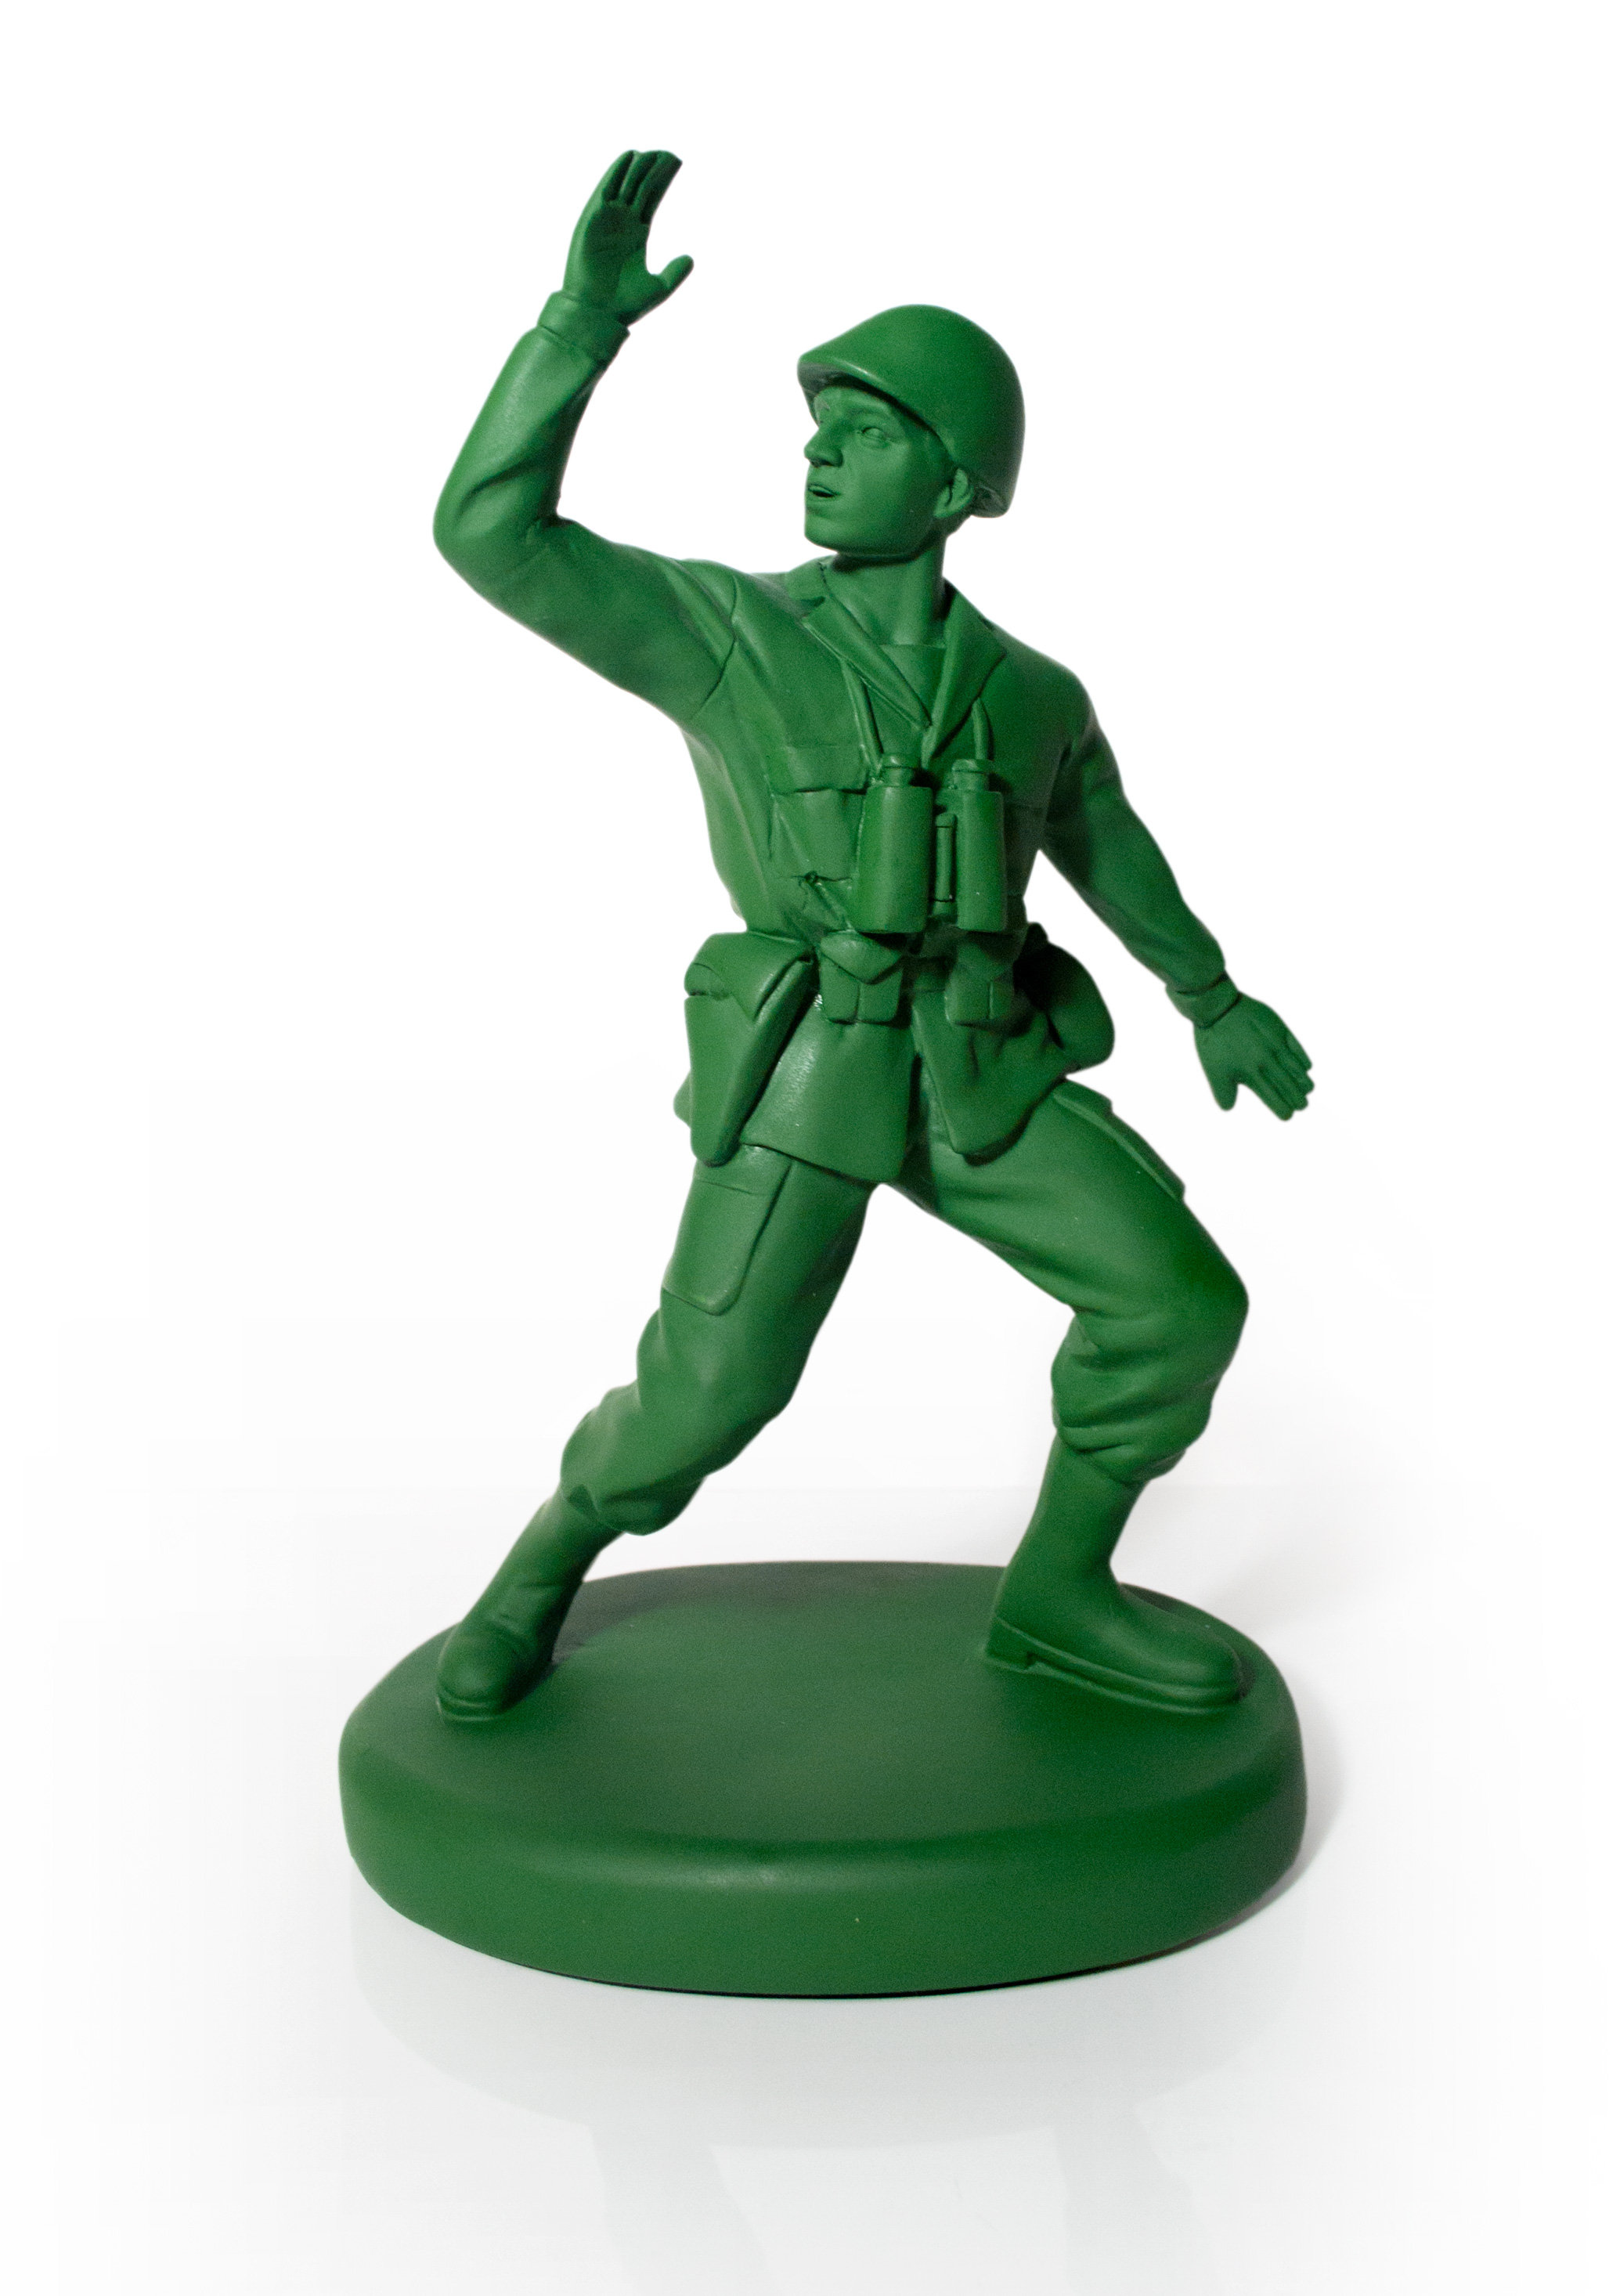 Home Guard Content Gallery : Doorstop & Bookend giant toy soldiers.